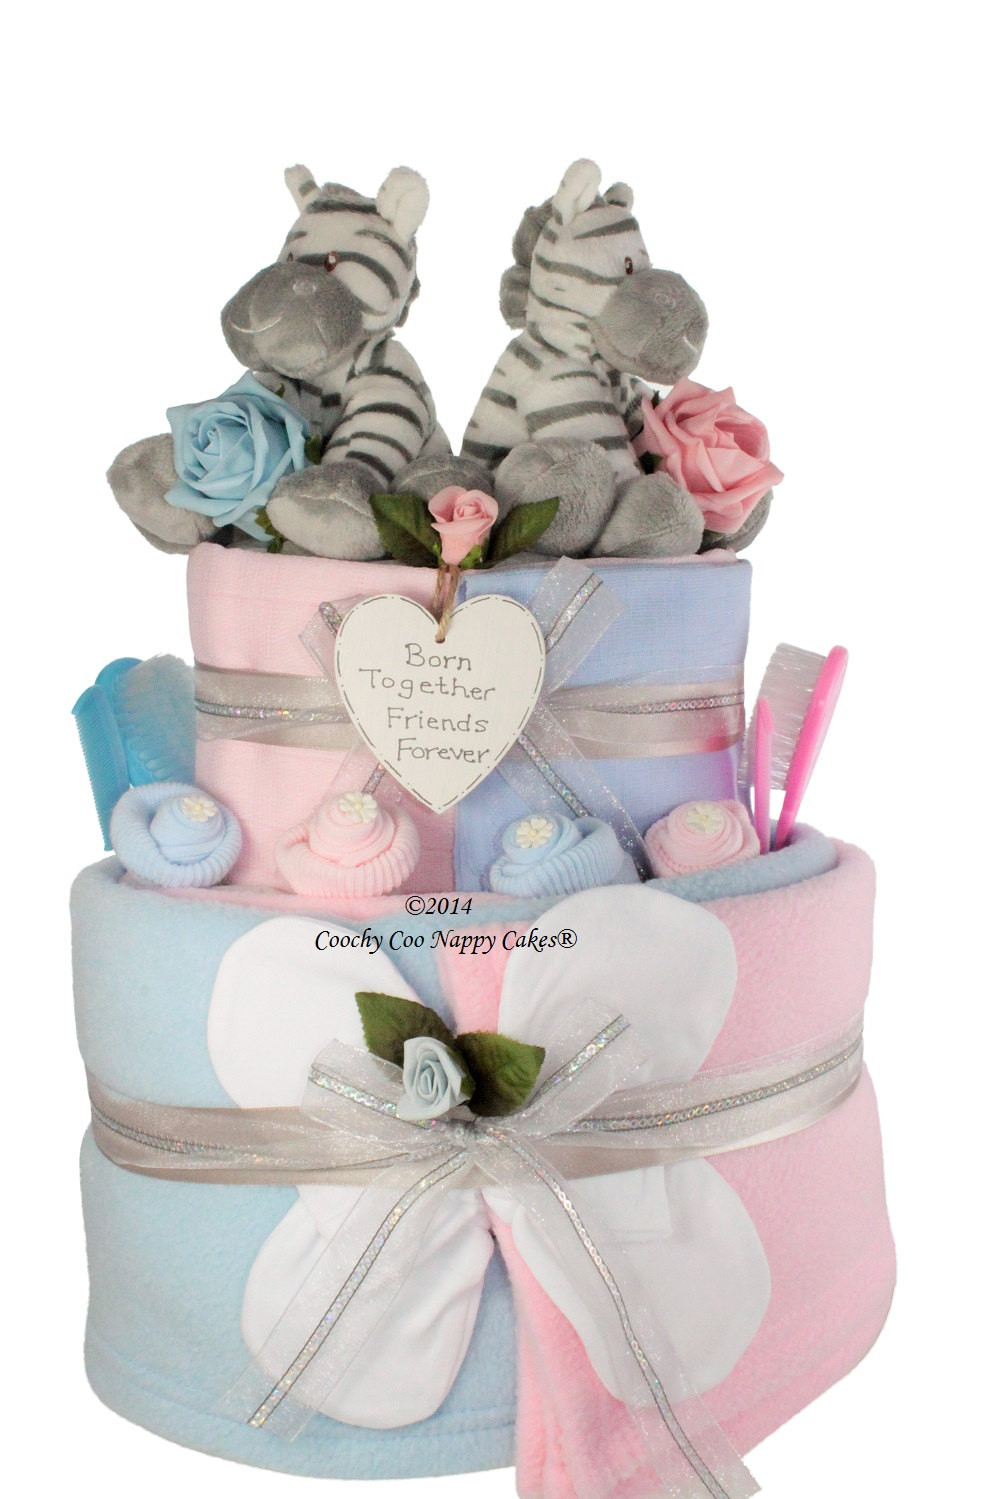 Baby Twins Gift Ideas
 Extra Two Tier Twin Baby Nappy Cake baby shower Gift